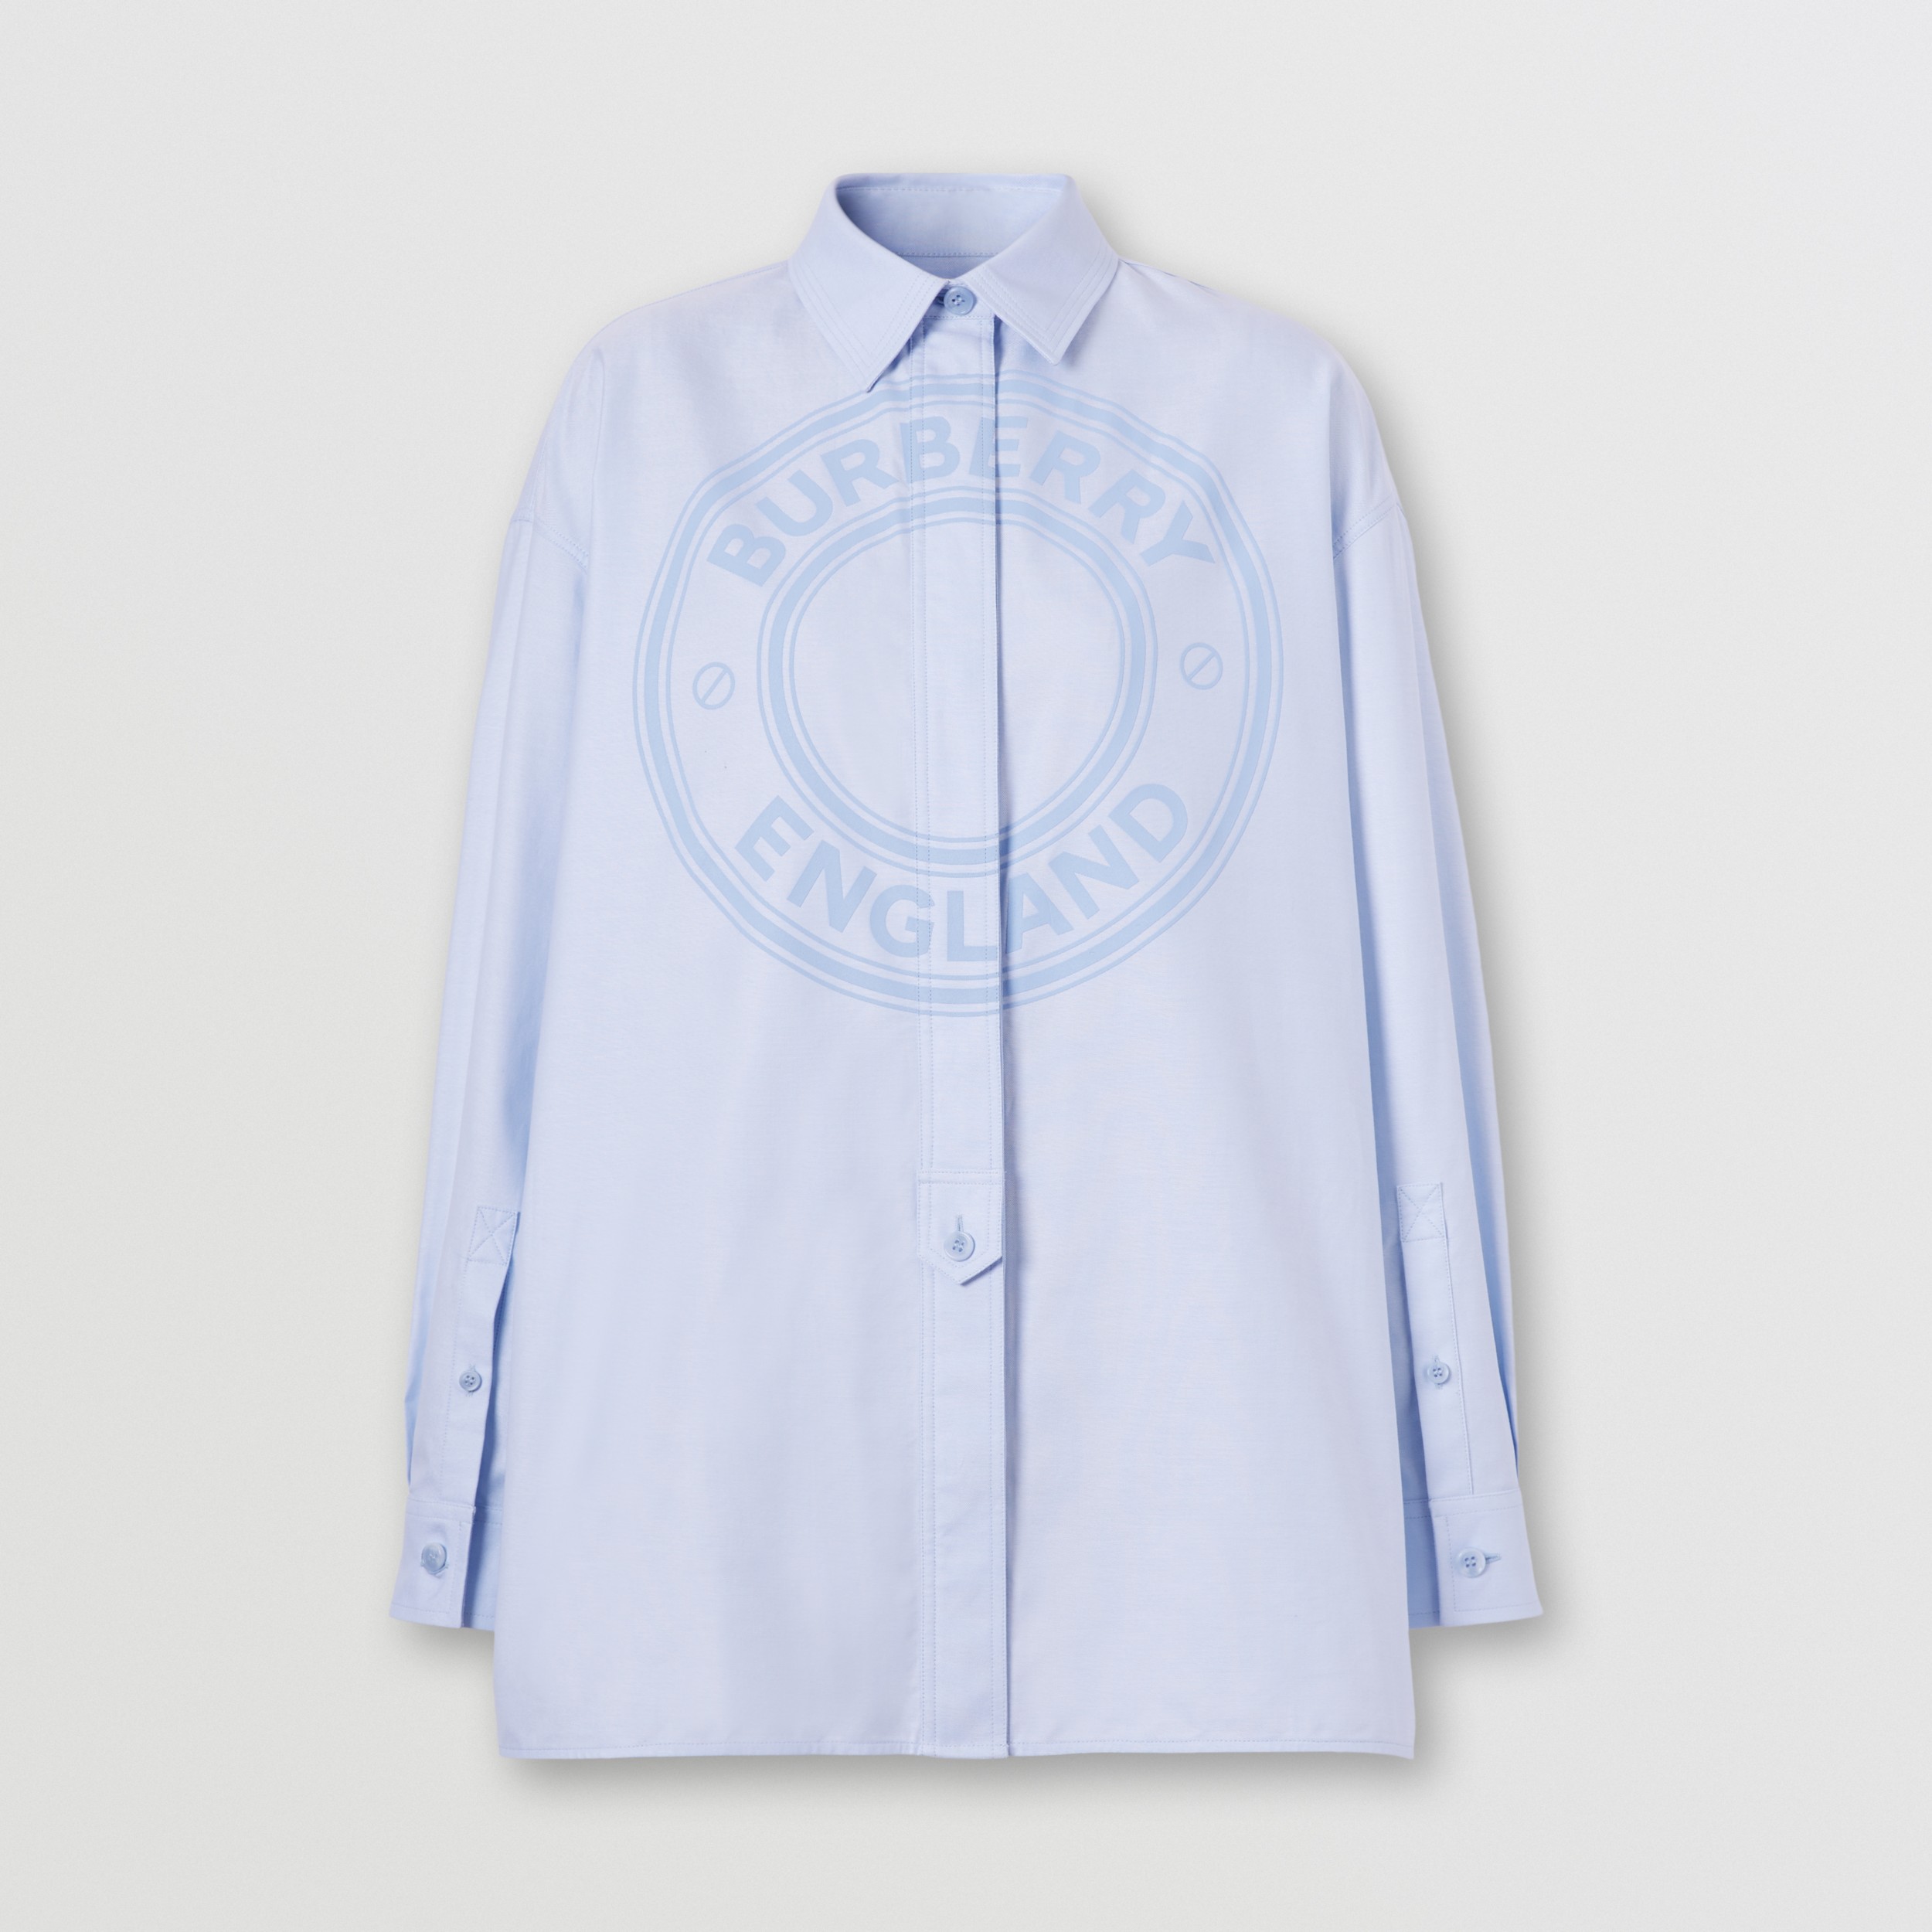 Logo Graphic Cotton Oxford Oversized Shirt in Pale Blue - Women | Burberry United Kingdom - 4